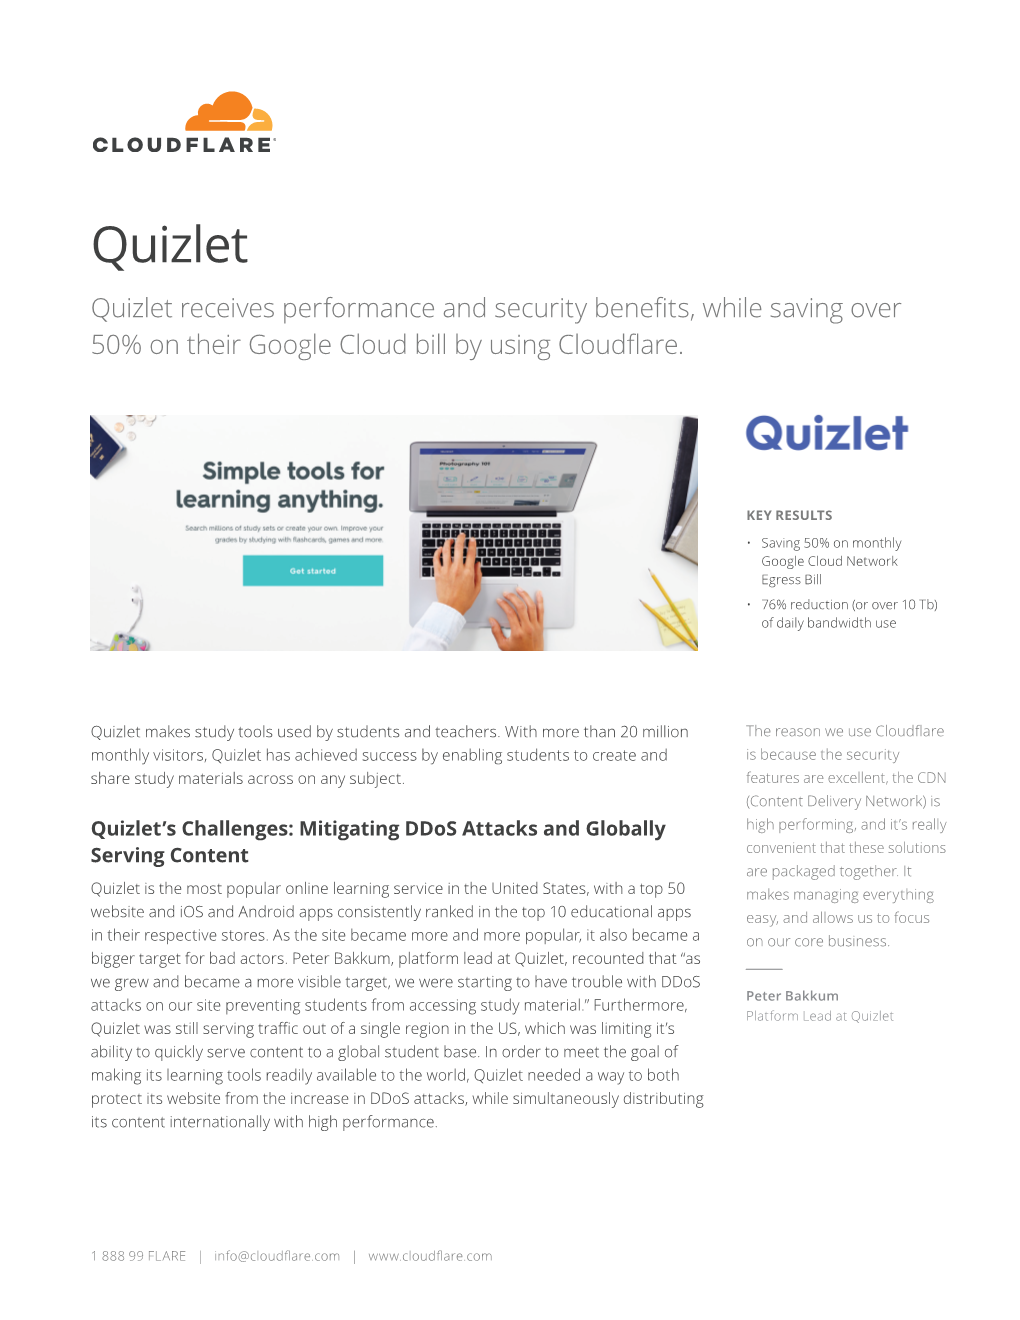 Quizlet Quizlet Receives Performance and Security Benefits, While Saving Over 50% on Their Google Cloud Bill by Using Cloudflare